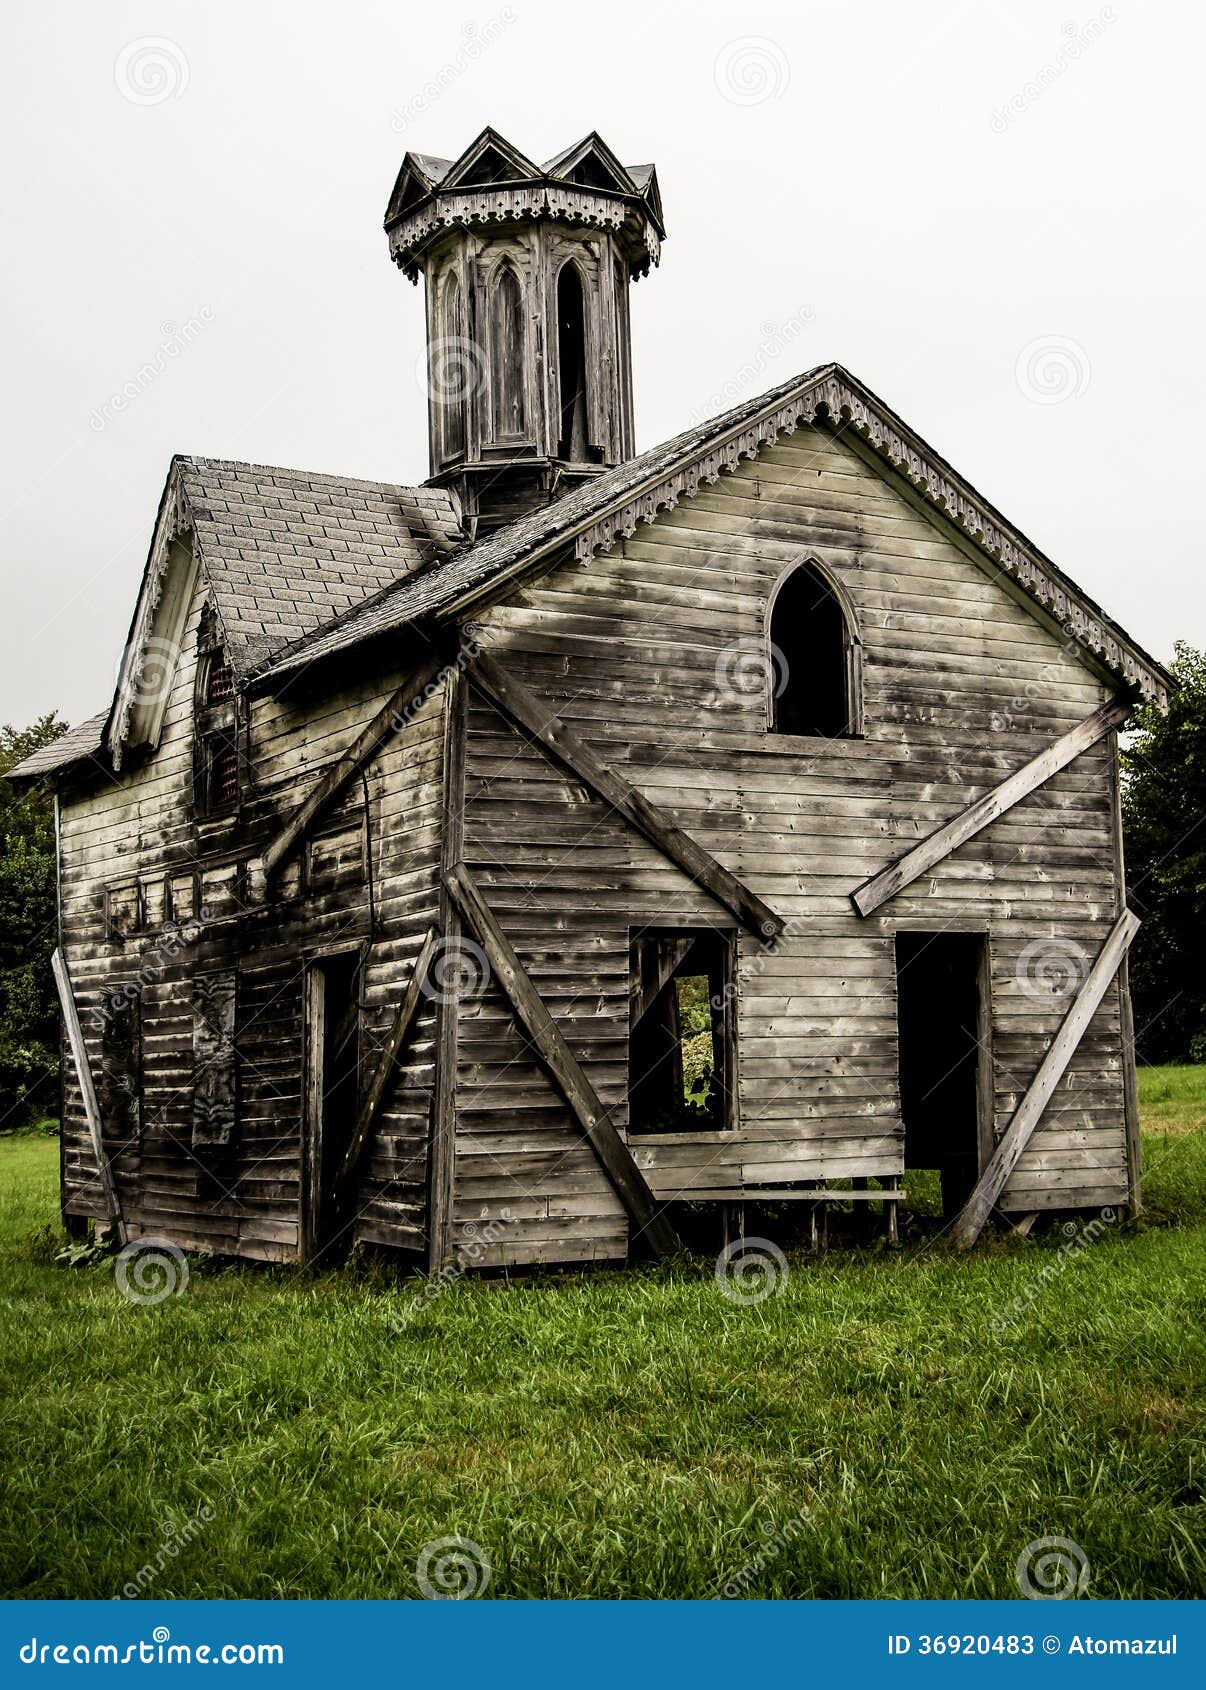 old-abandoned-building-facade-small-church-similar-historic-structure-rural-setting-36920483.jpg